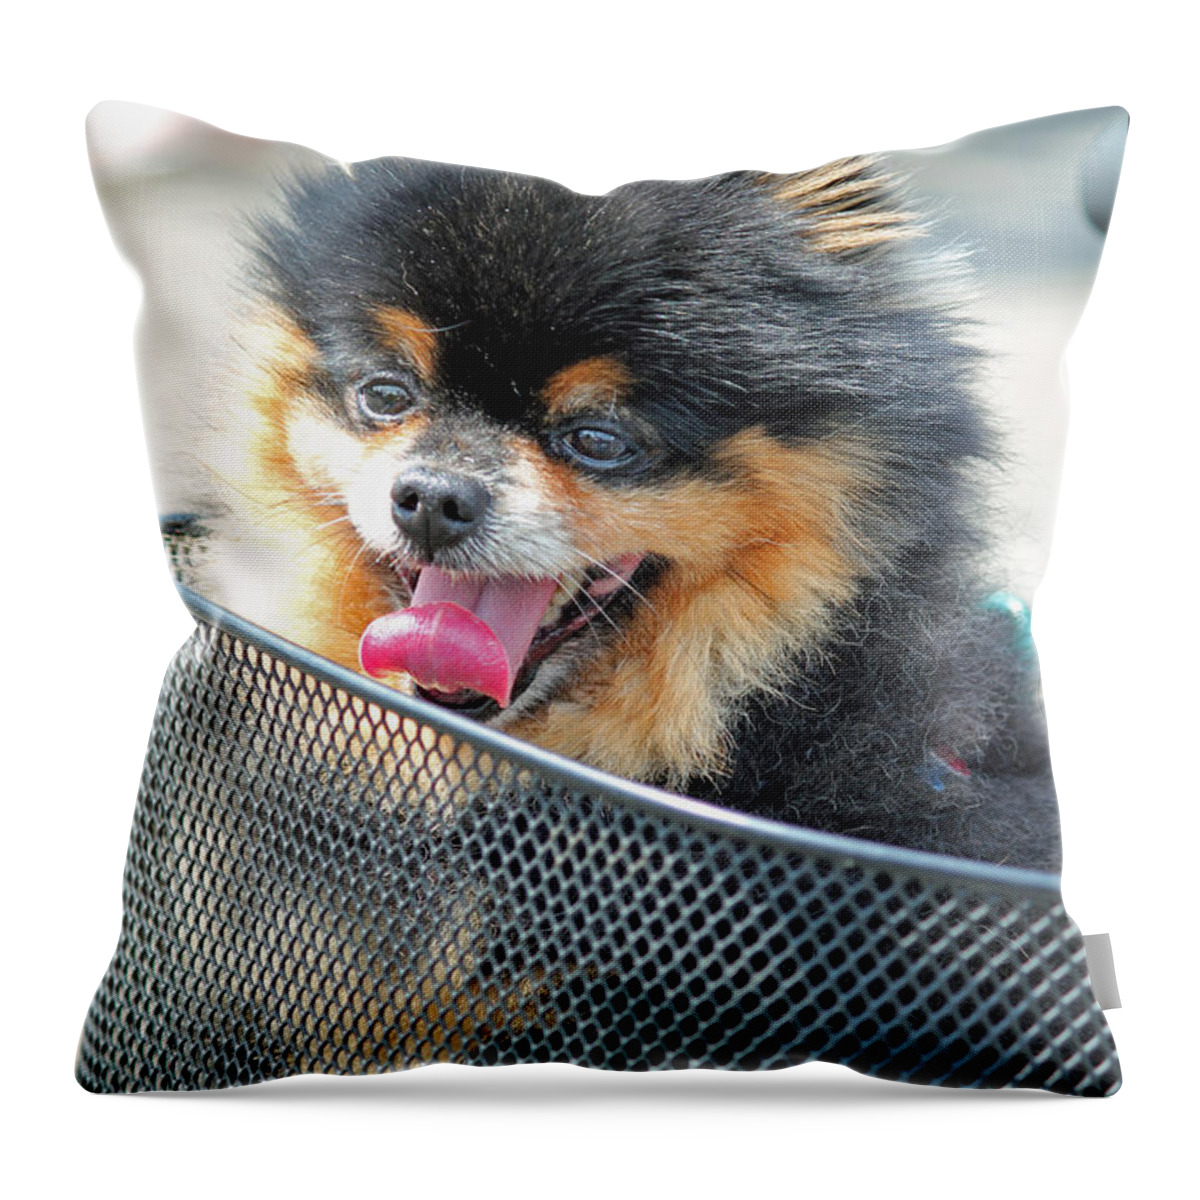 Dog In Basket Throw Pillow featuring the photograph Little Companion by E Faithe Lester